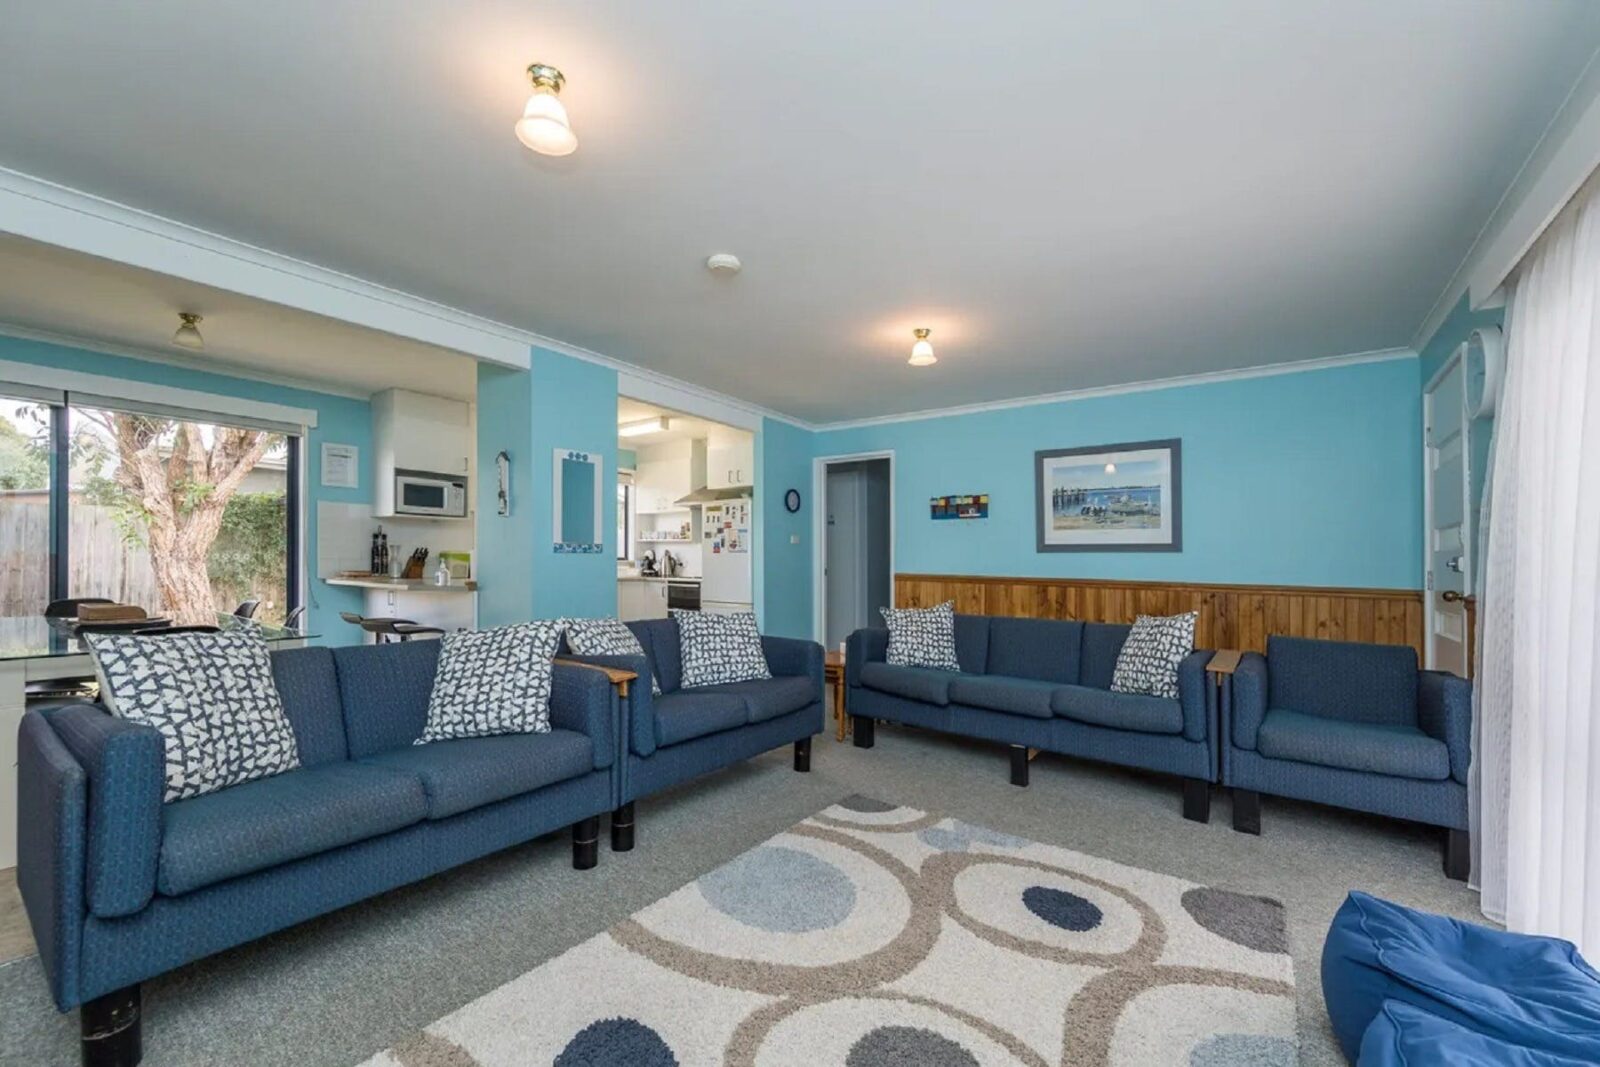 Very blue room with large couches, rug, looking beyond to kitchen and meals area